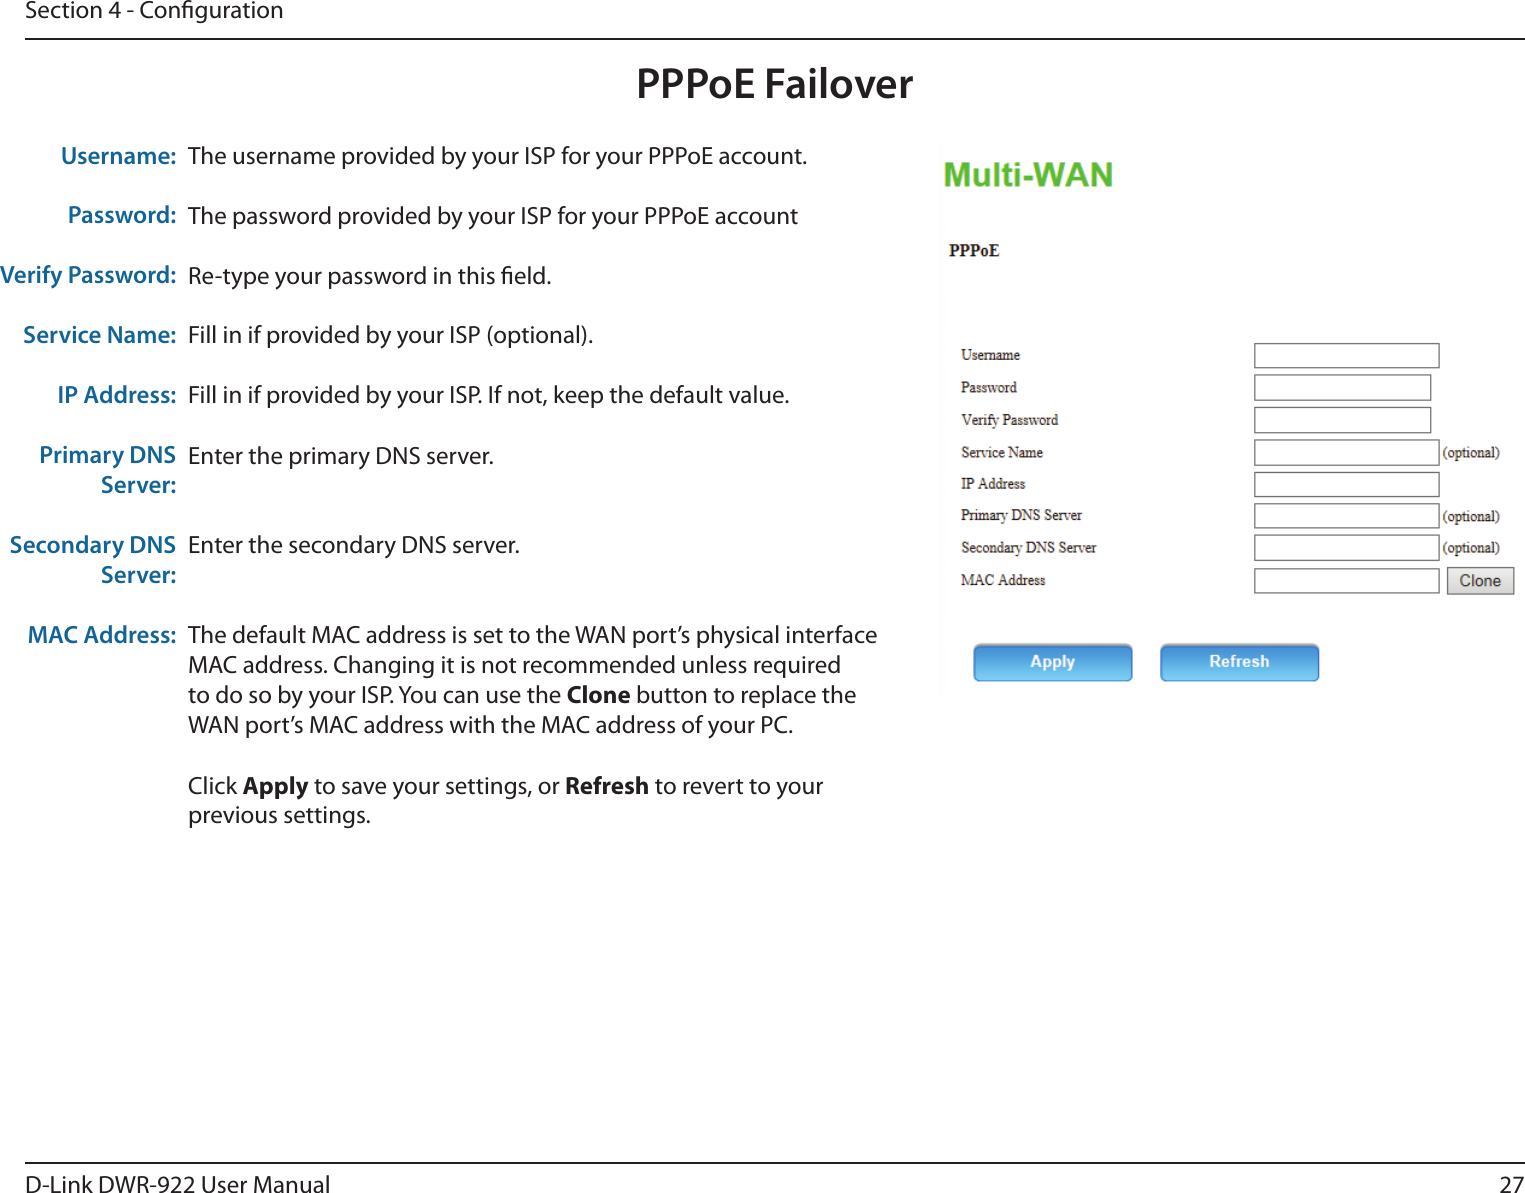 27D-Link DWR-922 User ManualSection 4 - CongurationPPPoE FailoverThe username provided by your ISP for your PPPoE account.The password provided by your ISP for your PPPoE accountRe-type your password in this eld.Fill in if provided by your ISP (optional).Fill in if provided by your ISP. If not, keep the default value.Enter the primary DNS server.Enter the secondary DNS server.The default MAC address is set to the WAN port’s physical interface MAC address. Changing it is not recommended unless required to do so by your ISP. You can use the Clone button to replace the WAN port’s MAC address with the MAC address of your PC.Click Apply to save your settings, or Refresh to revert to your previous settings.Username:Password:Verify Password:Service Name:IP Address:Primary DNS Server:Secondary DNS Server:MAC Address: